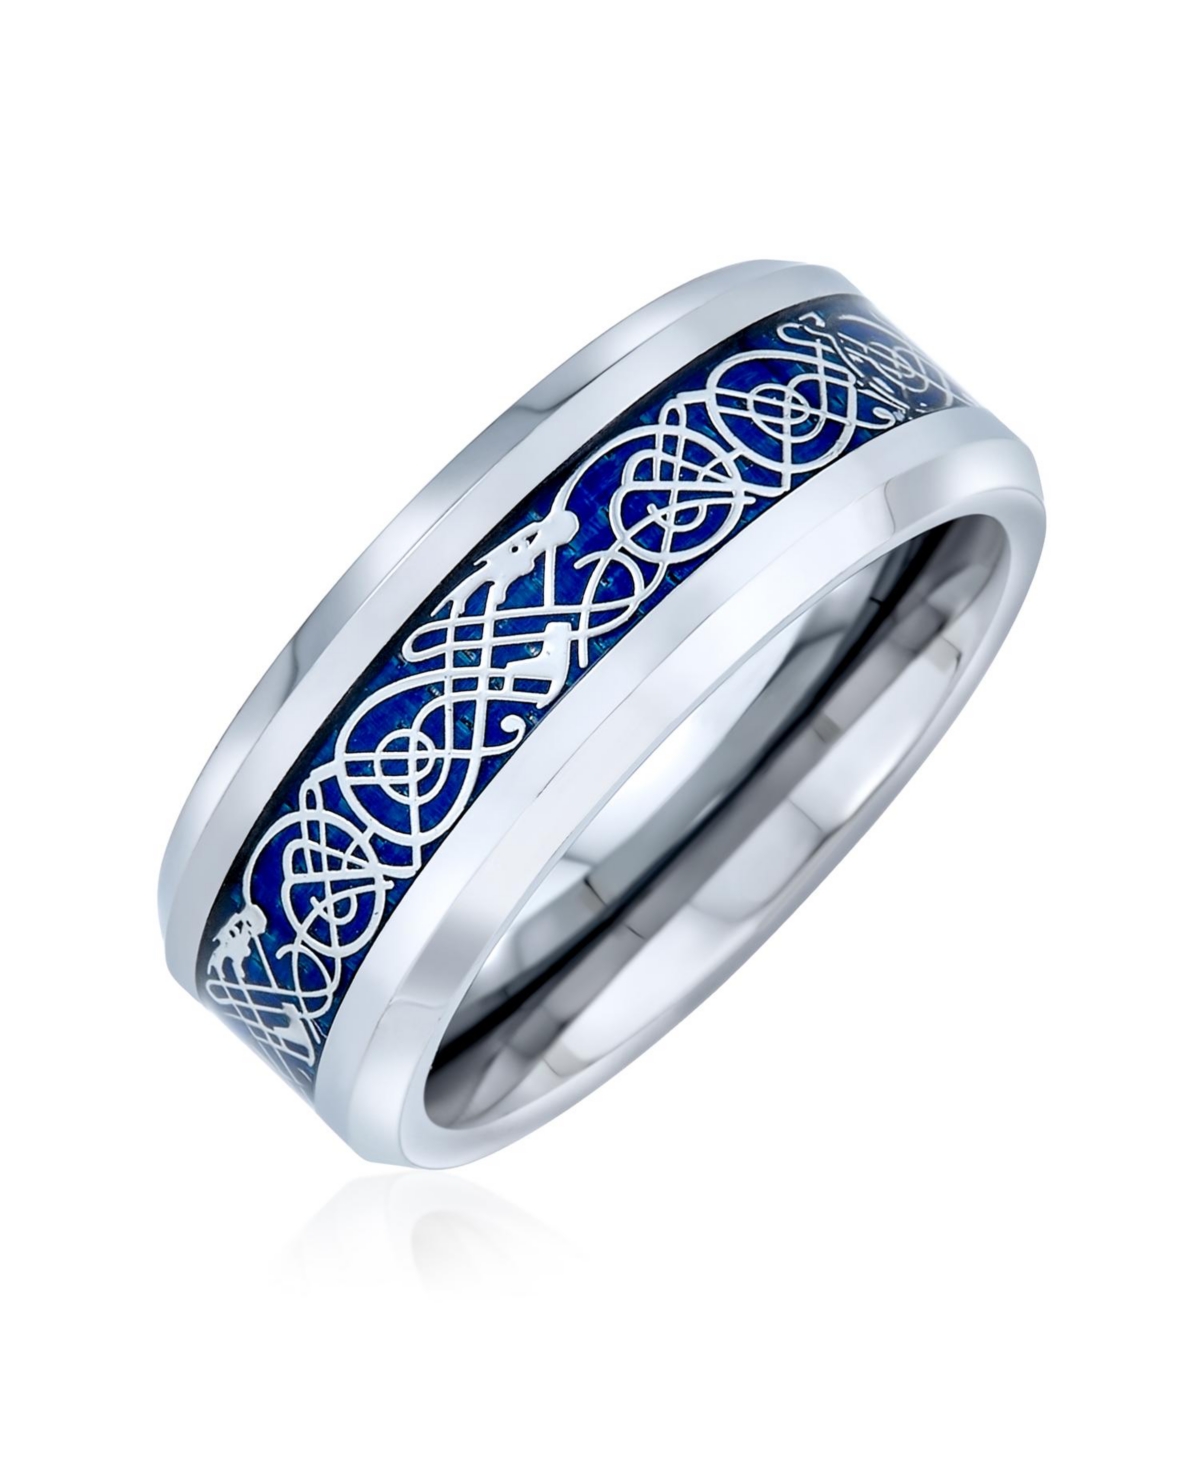 Celtic Knot Dragon Carbon Fiber Inlay Titanium Wedding Band Rings For Men For Women Comfort Fit 8MM Wide - Blue